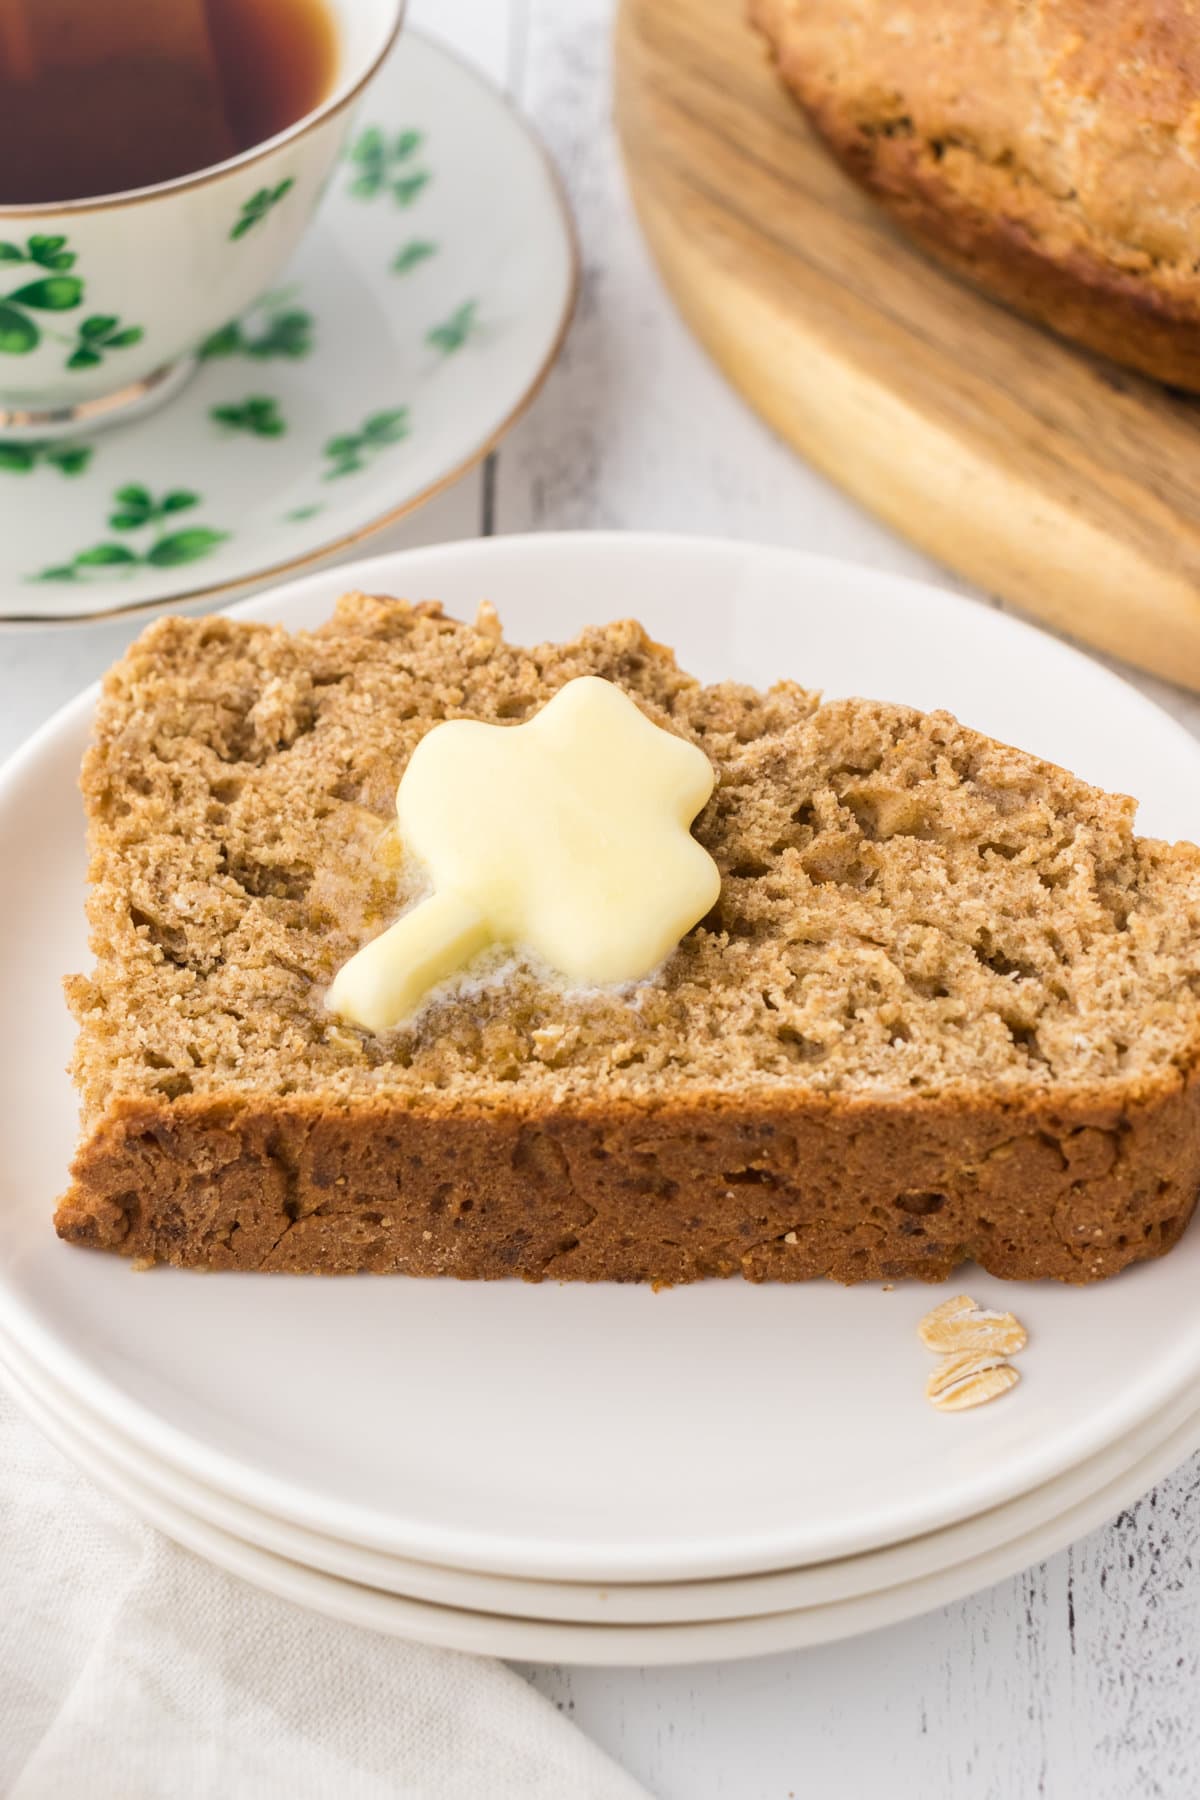 Closeup of a slice of Irish soda bread with a shamrock shaped pat of butter melting on top.